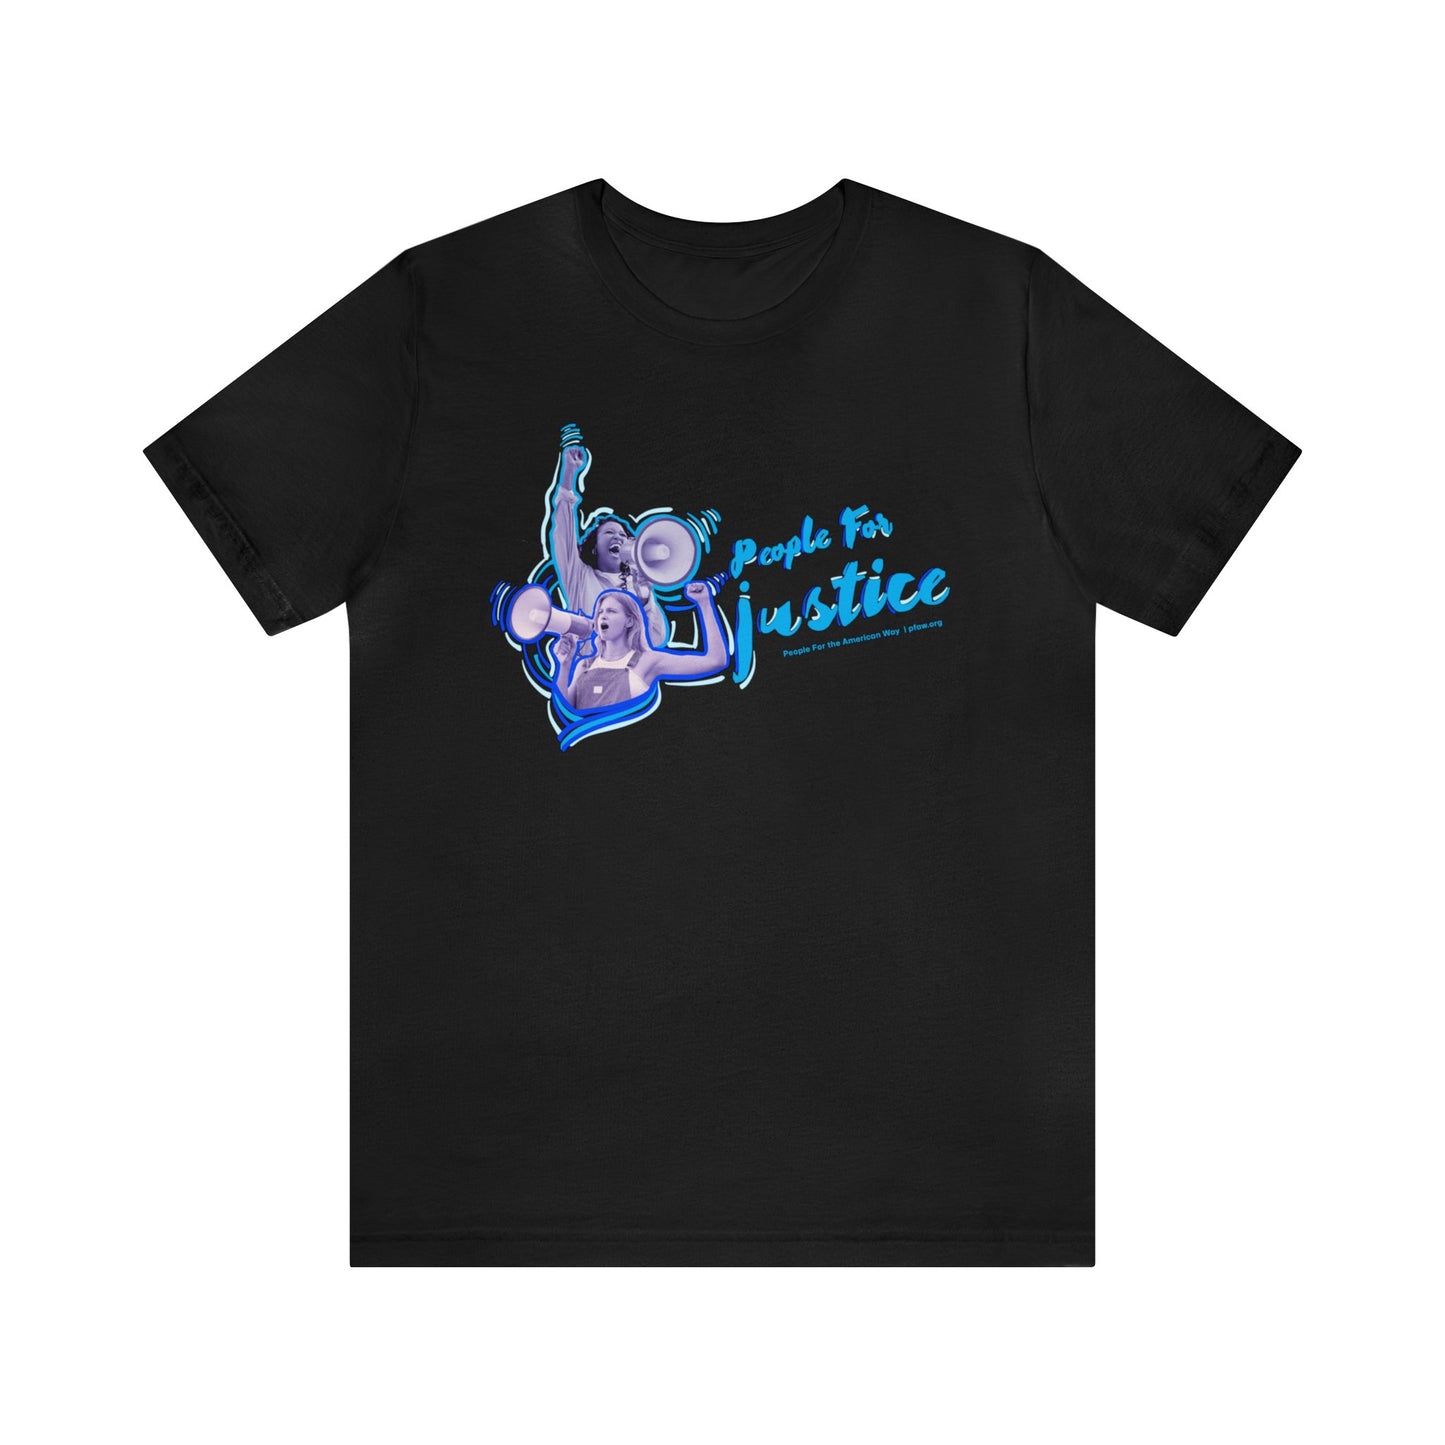 People For Justice Shirt